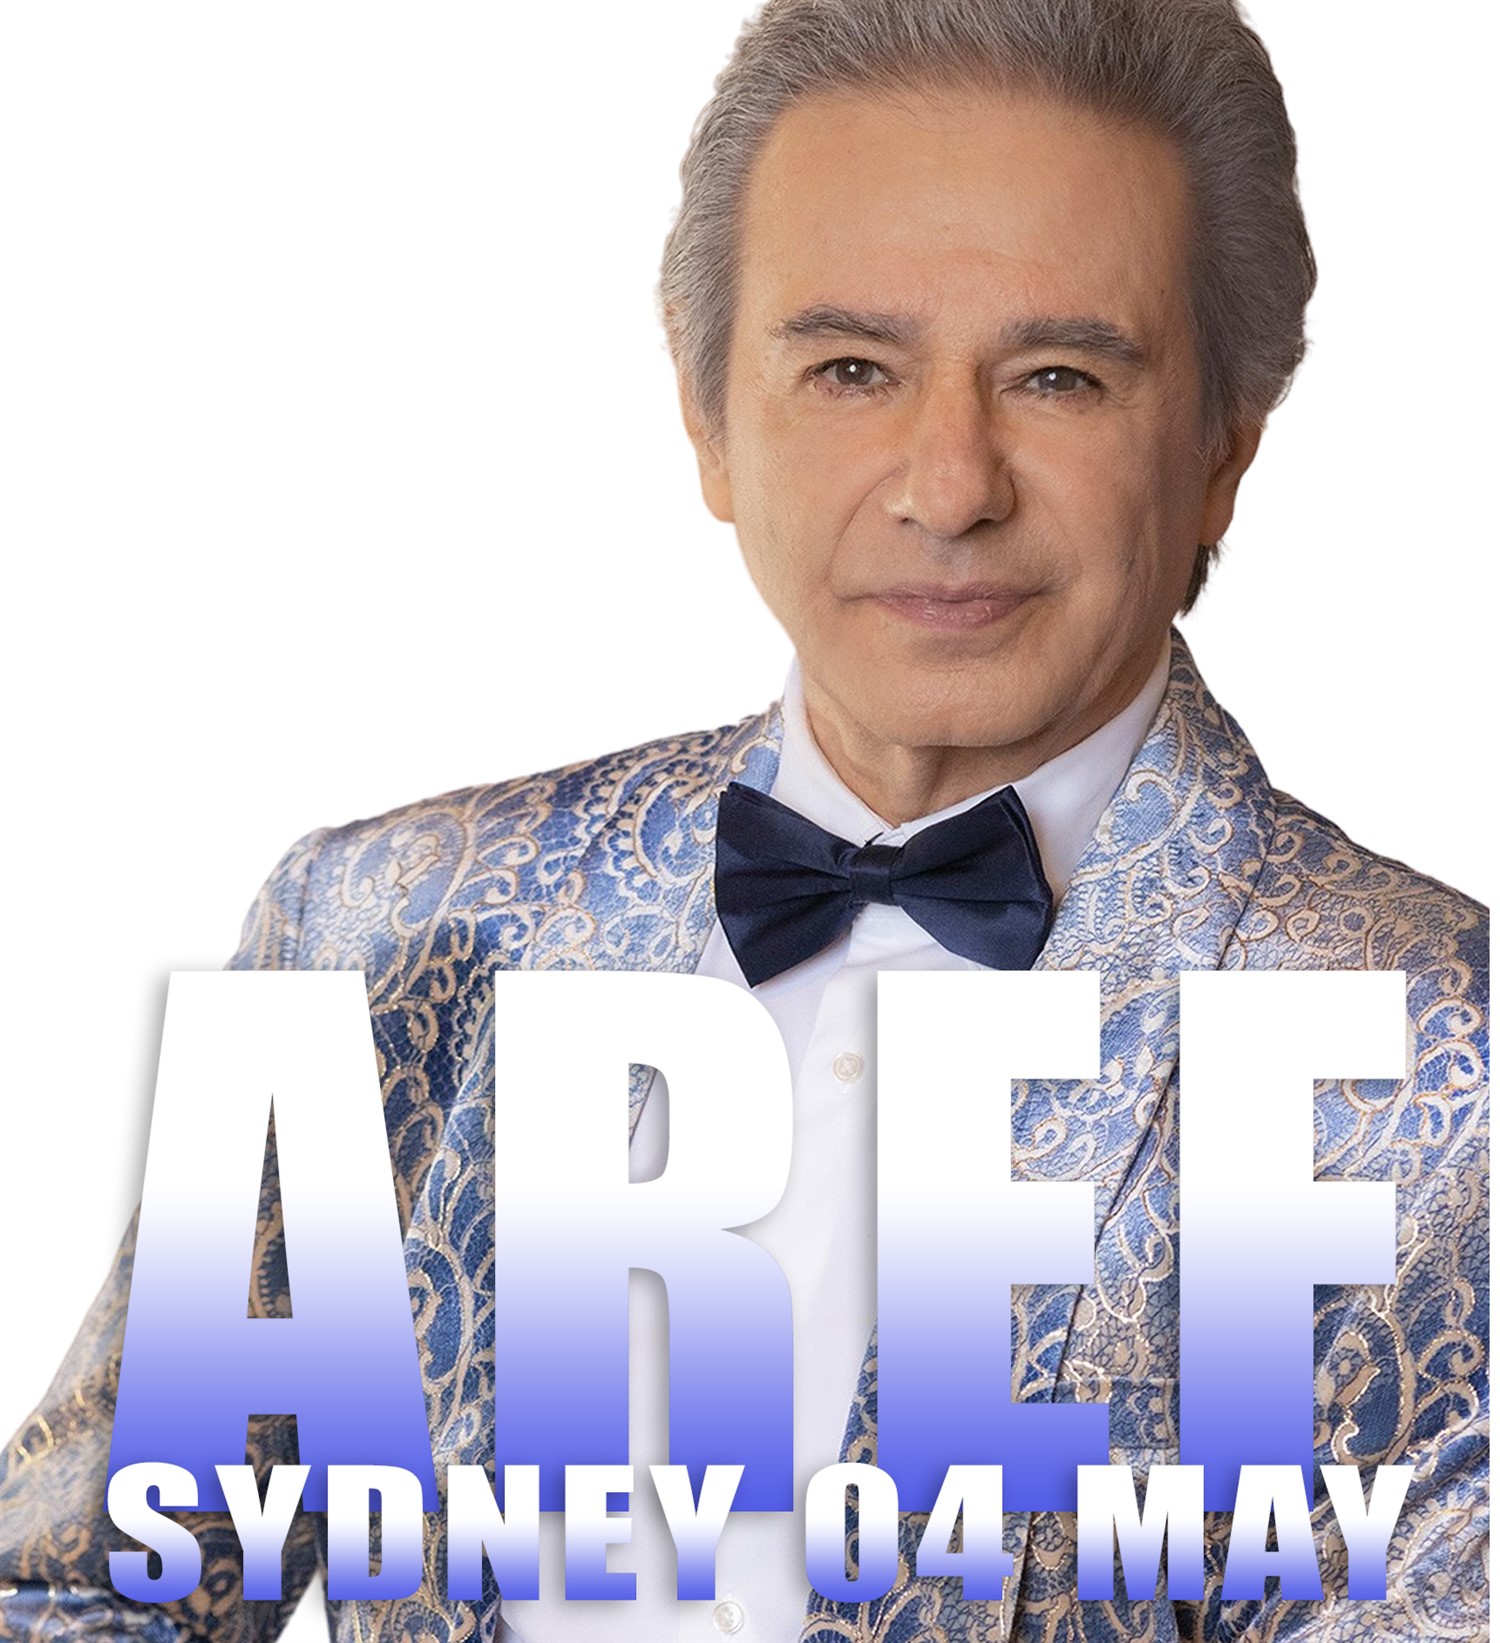 AREF live in SYDNEY Farewell show on May 04, 20:15@Hillsong Auditorium - Pick a seat, Buy tickets and Get information on tktdig tktdig.com